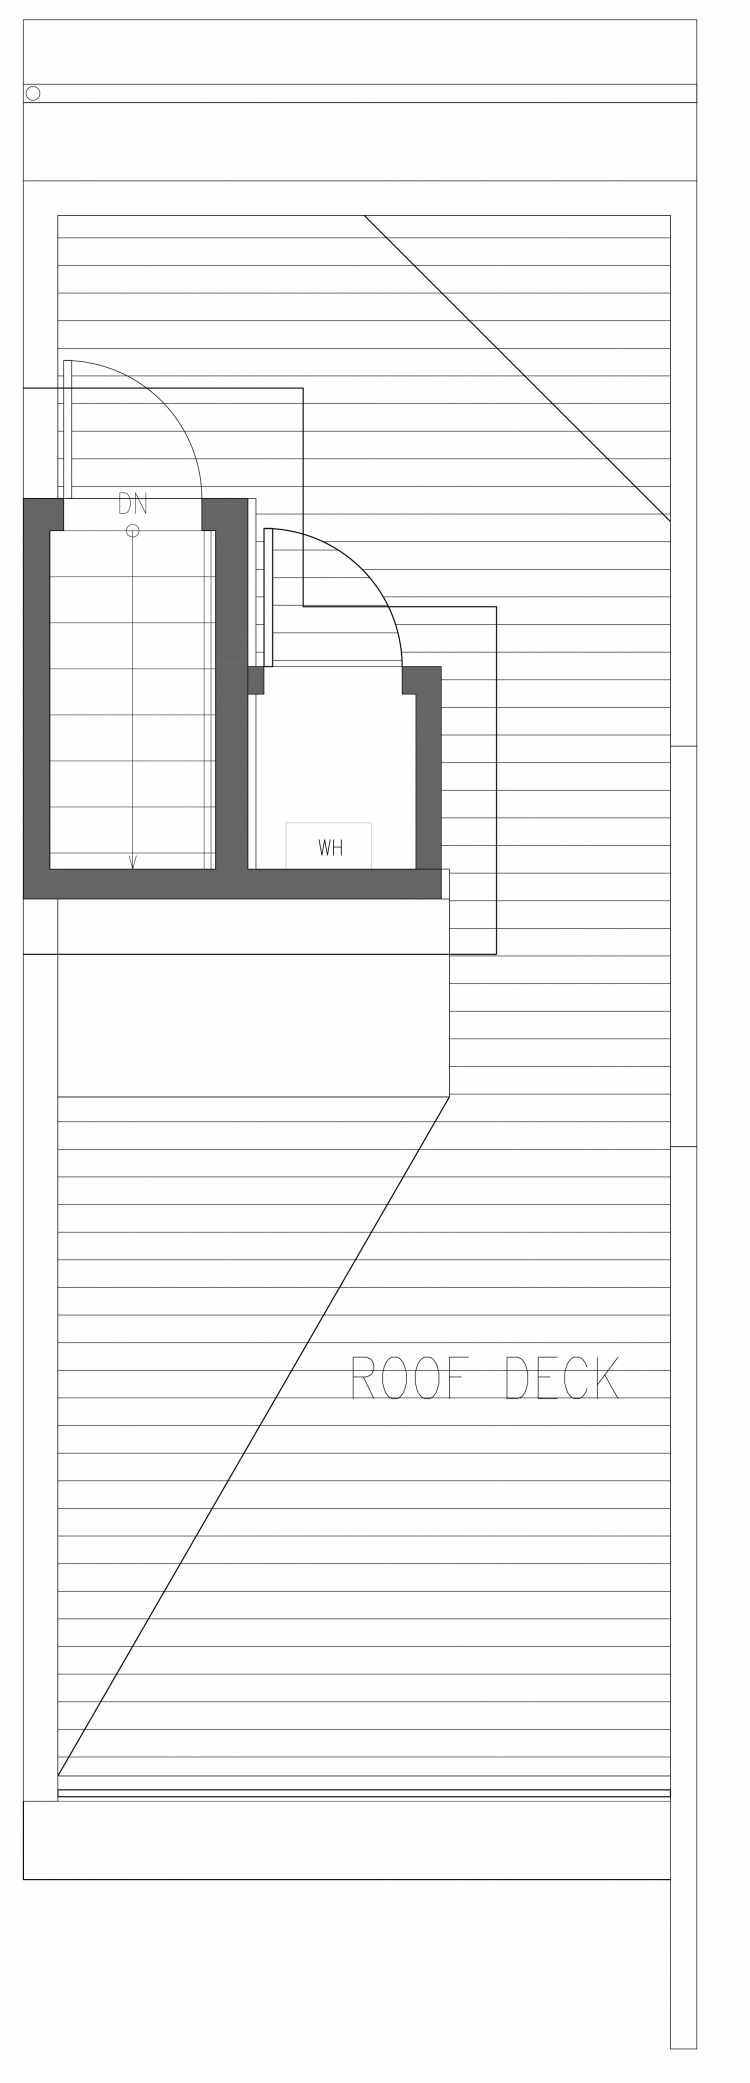 Roof Deck Floor Plan of 2357 Beacon Ave S, One of the Brea Townhomes in North Beacon Hill